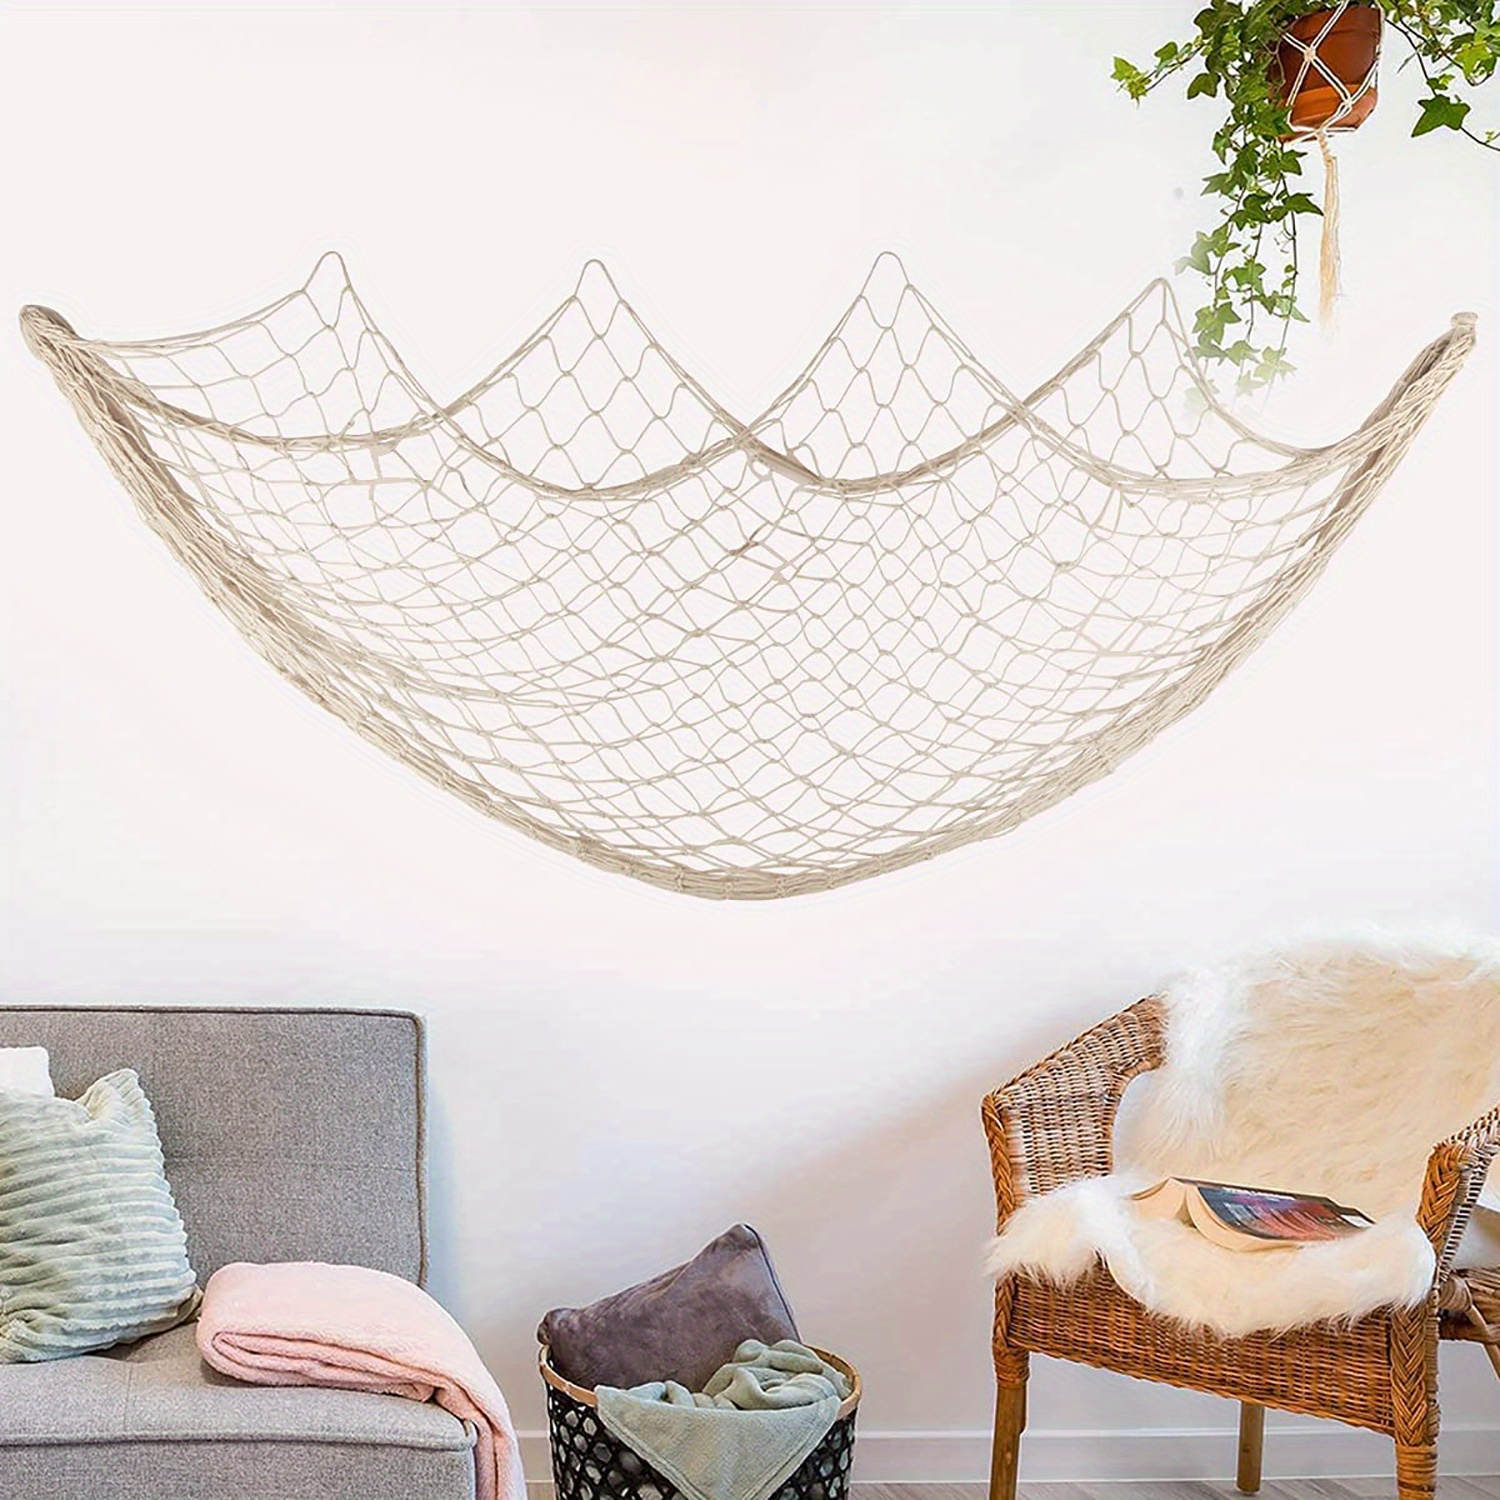 Rosoz Nature Fish Net Wall Decoration with Shells, Ocean Themed Wall  Hangings Fishing Net Party Decor for Pirate Party,Wedding,Photographing